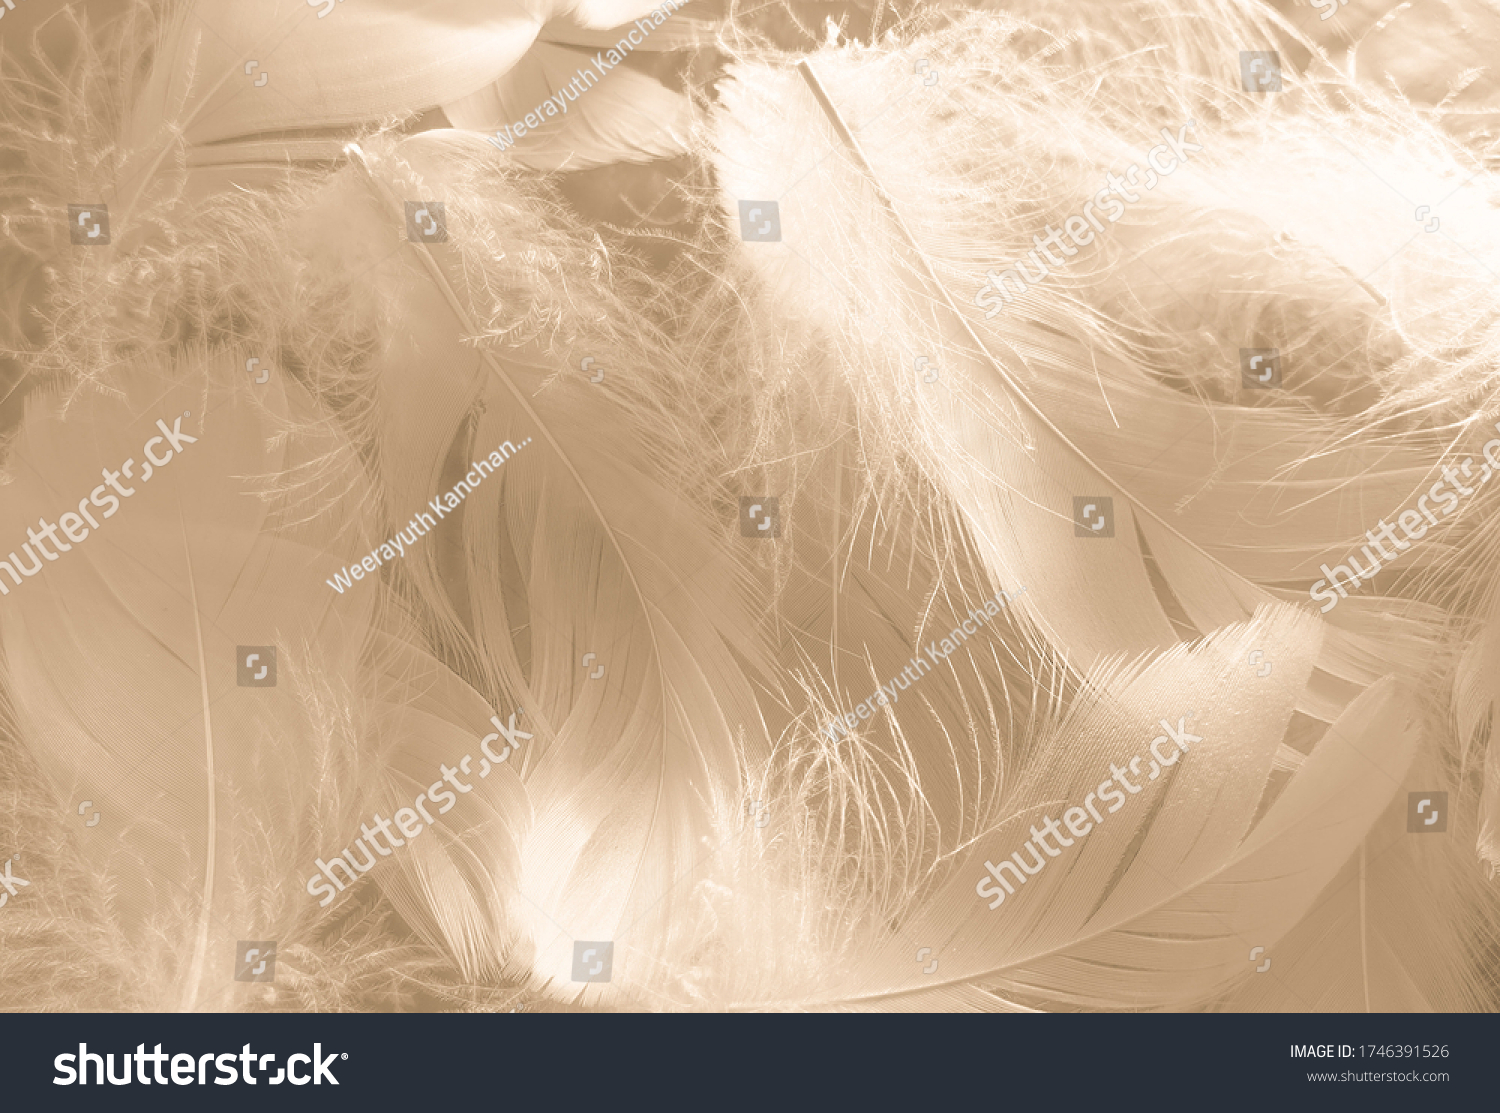 Beautiful abstract white and brown feathers on white background and soft yellow feather texture on white pattern and yellow background, feather background, gold feathers banners #1746391526